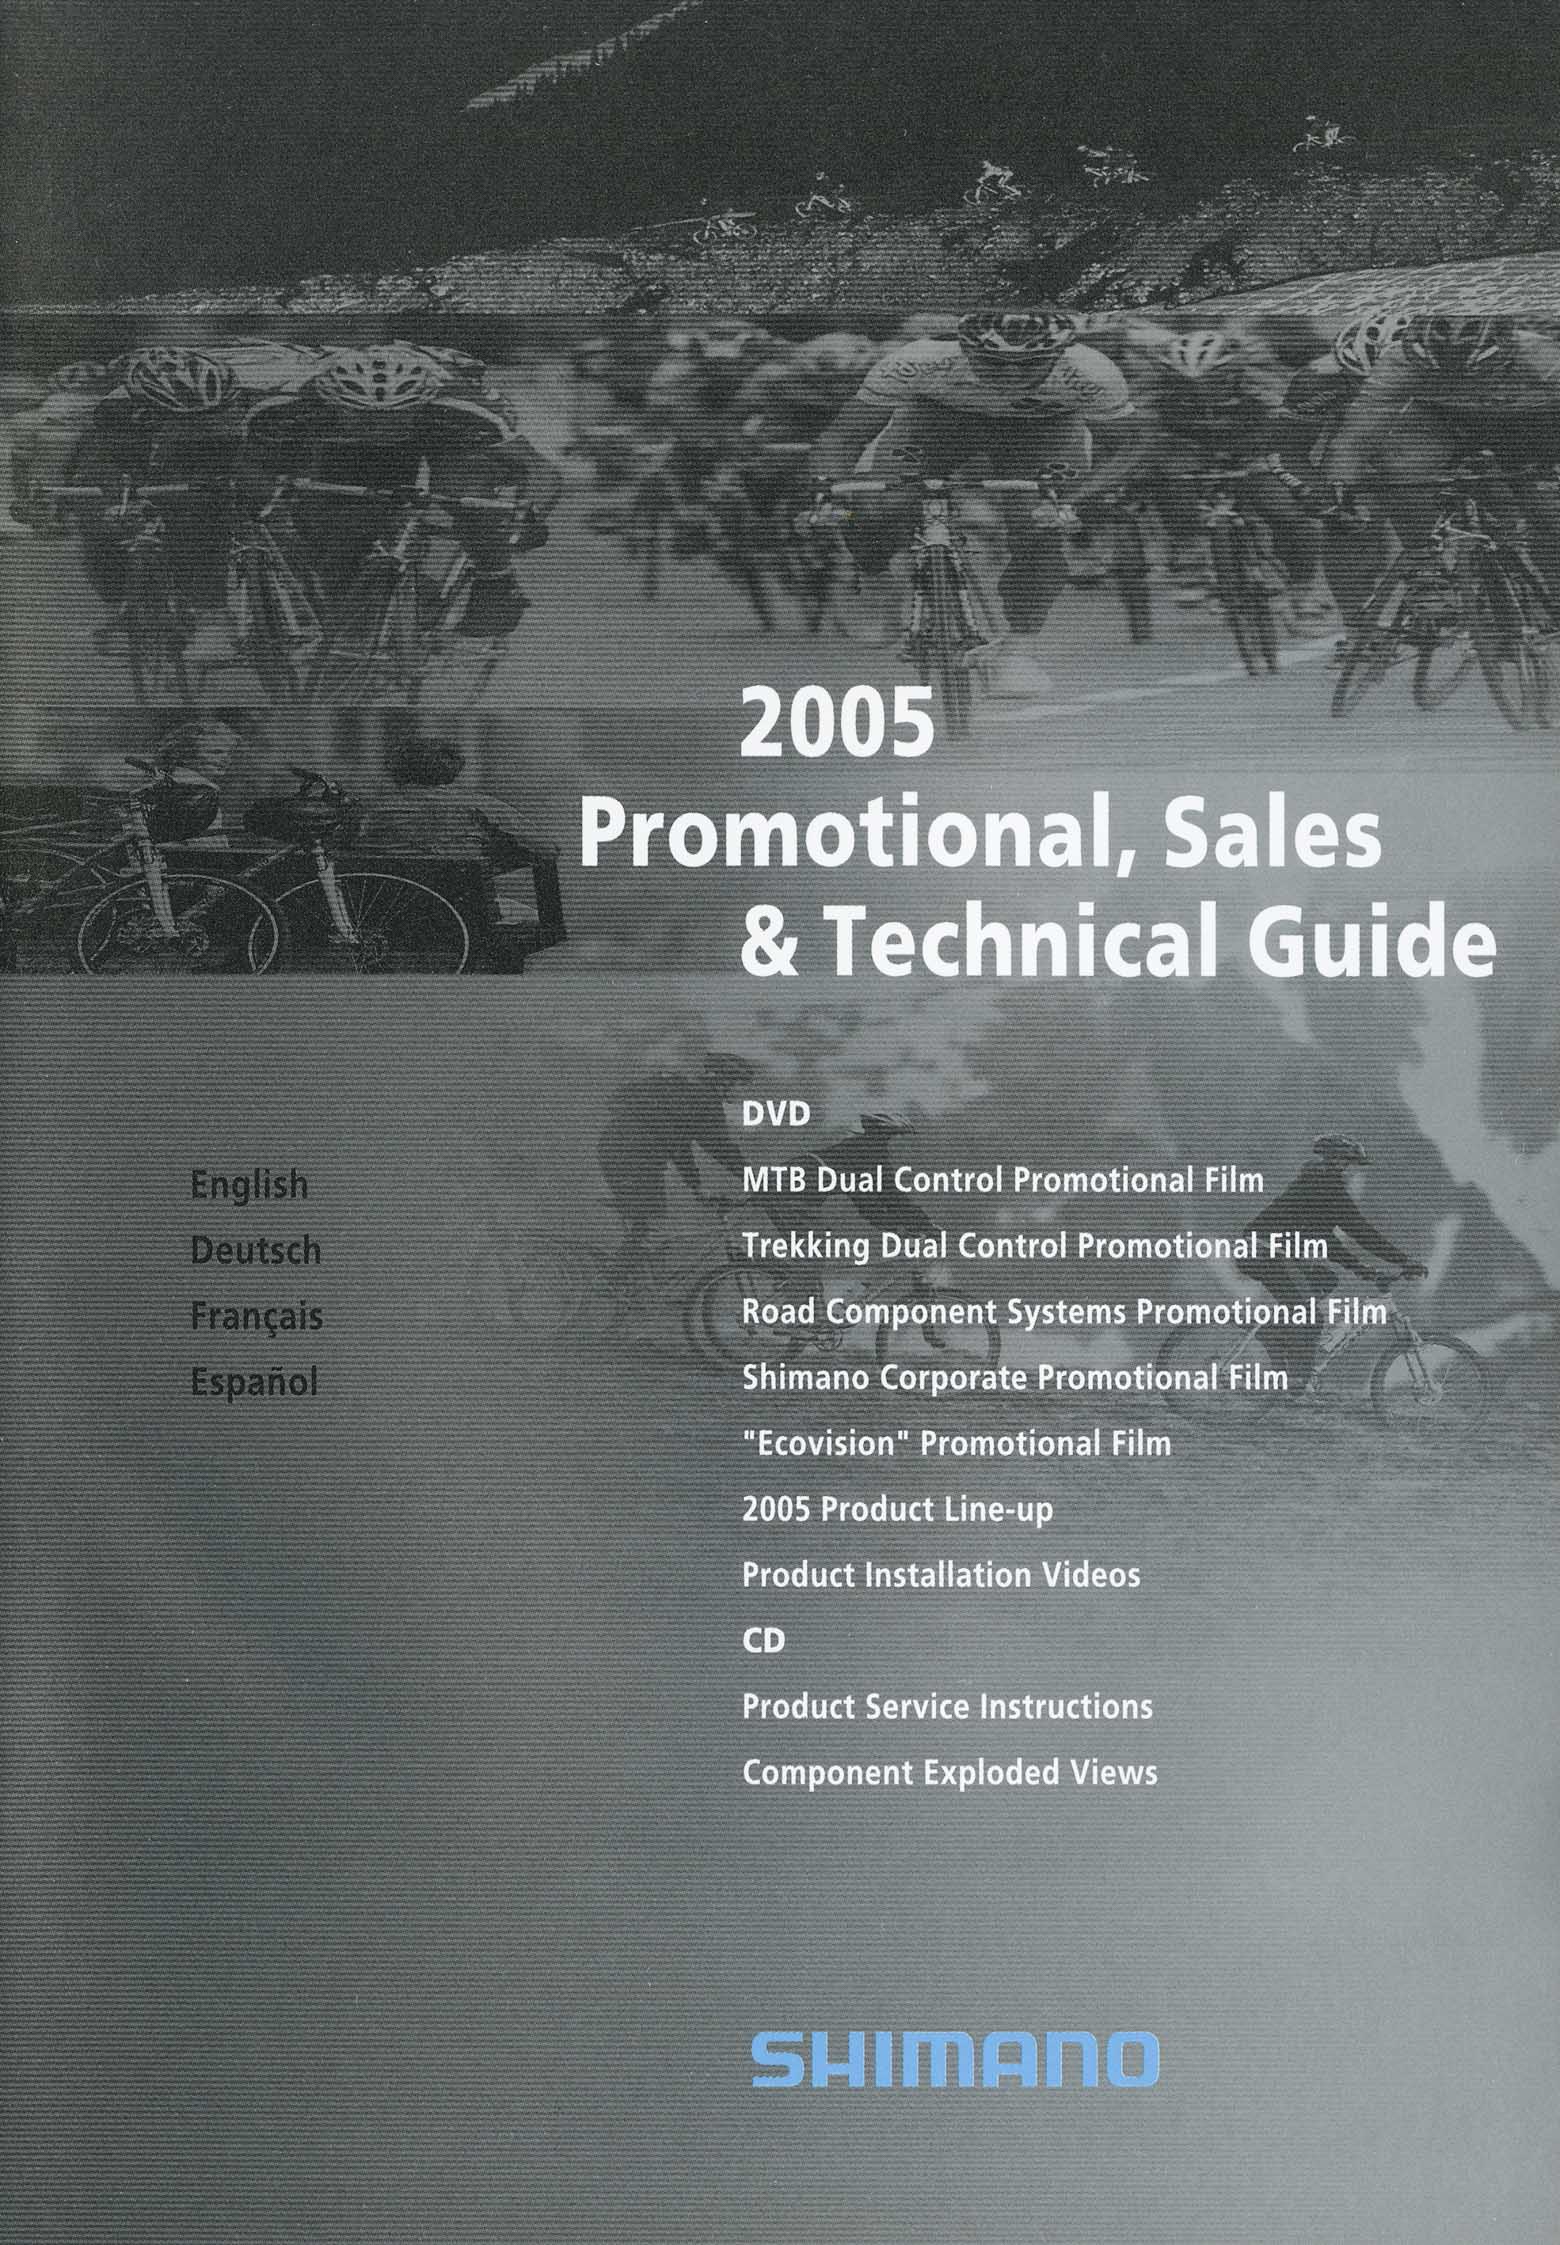 Shimano 2005 Promotional, Sales & Technical Guide main image